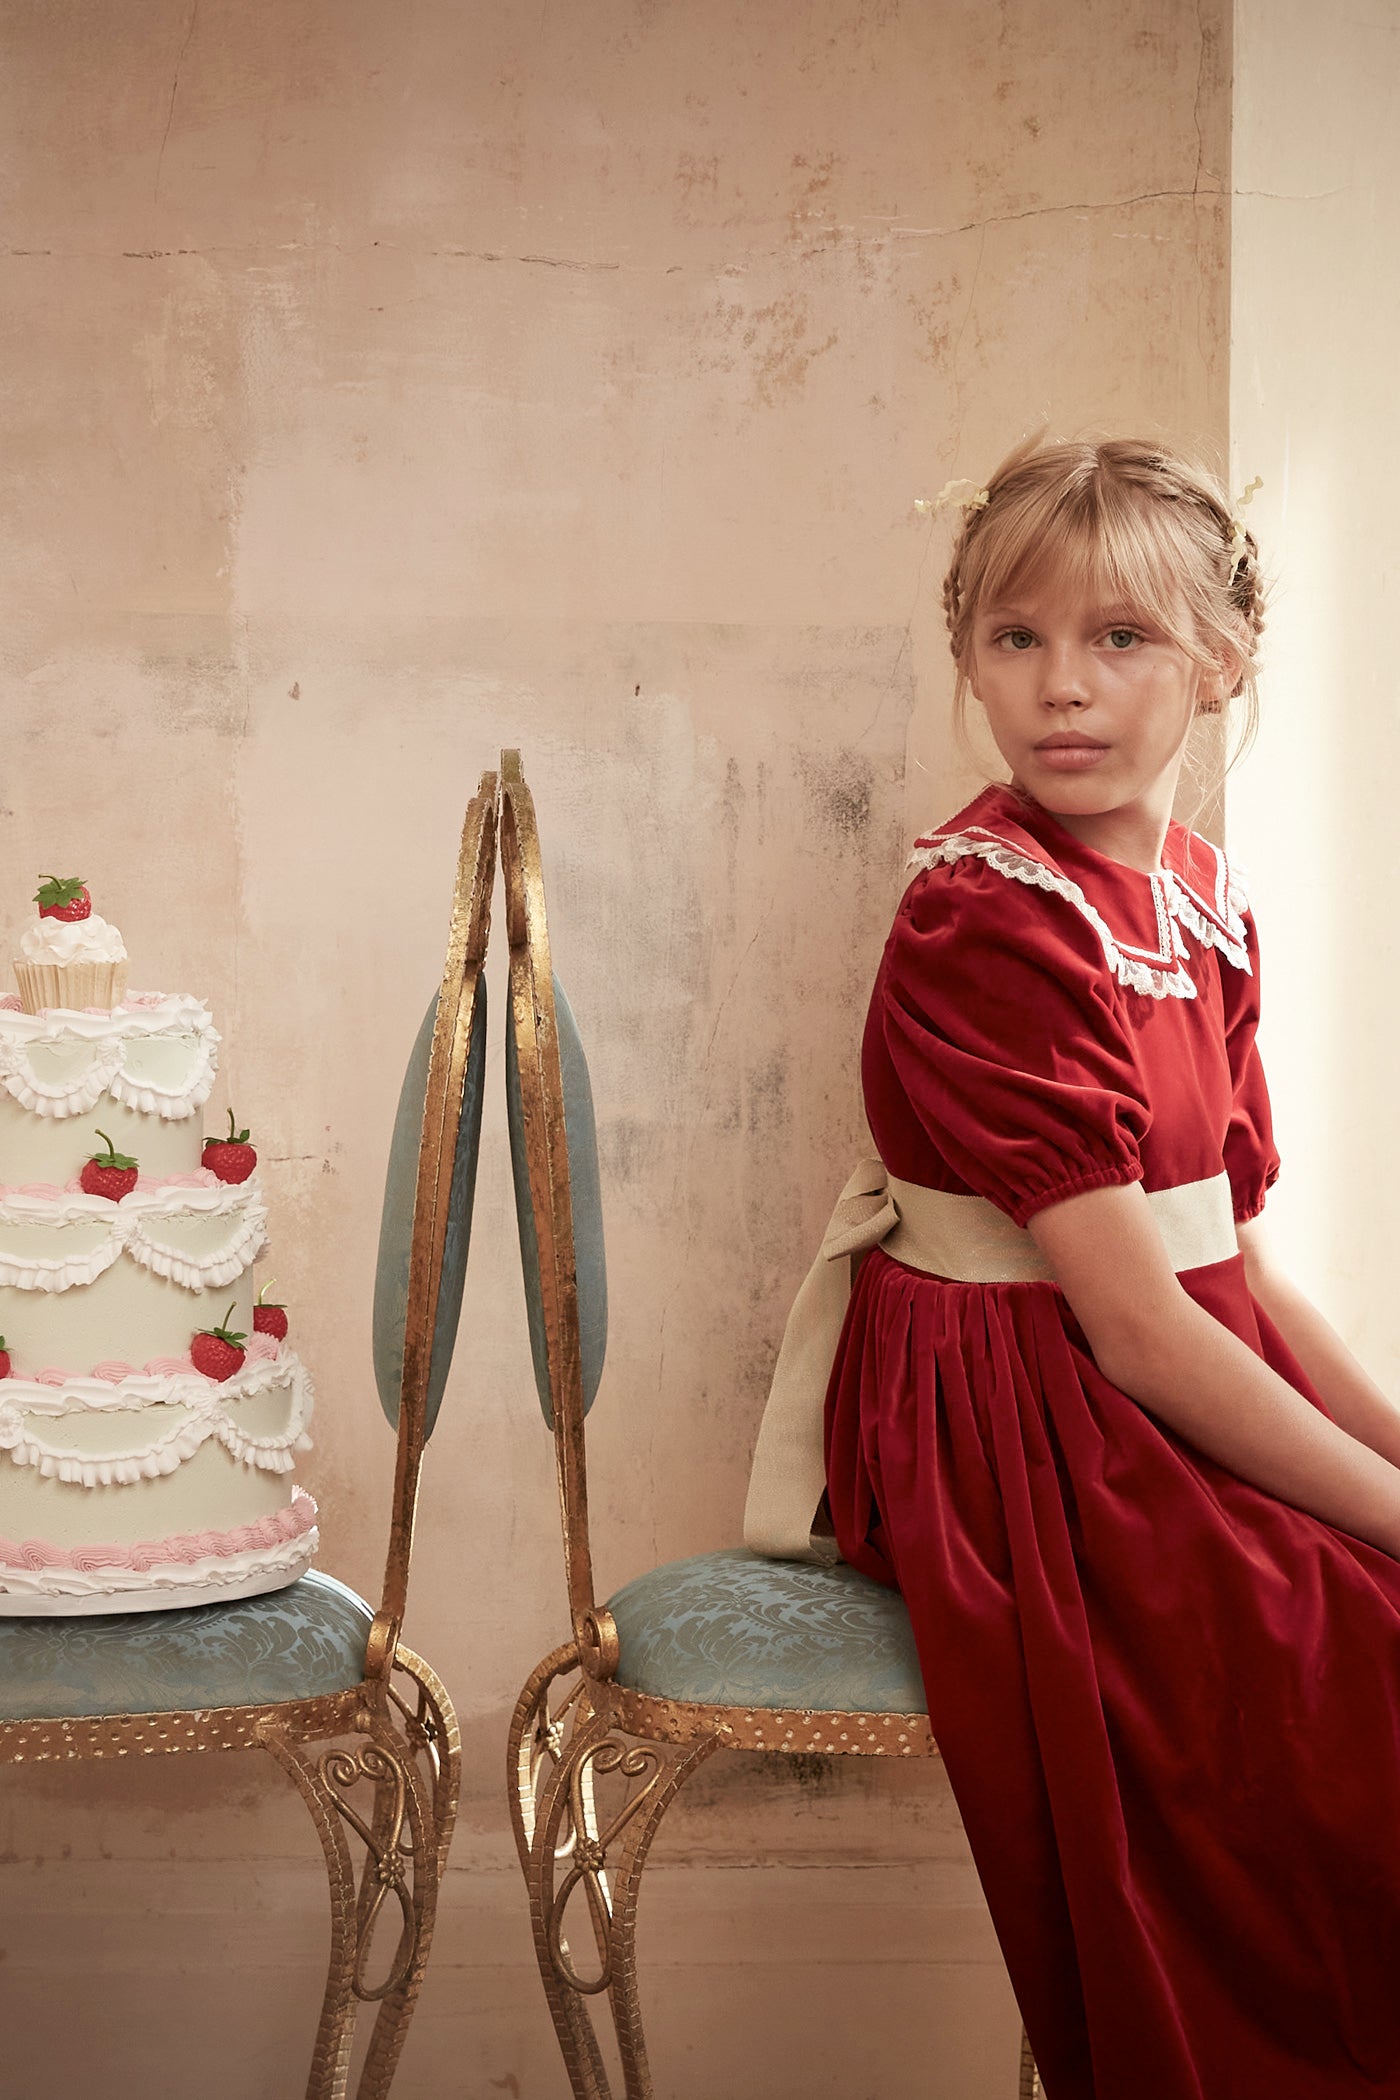 Ginger Queen Dress Red Velvet - Occasional Party - Designed by Ingrid Lewis - Strawberries & Cream